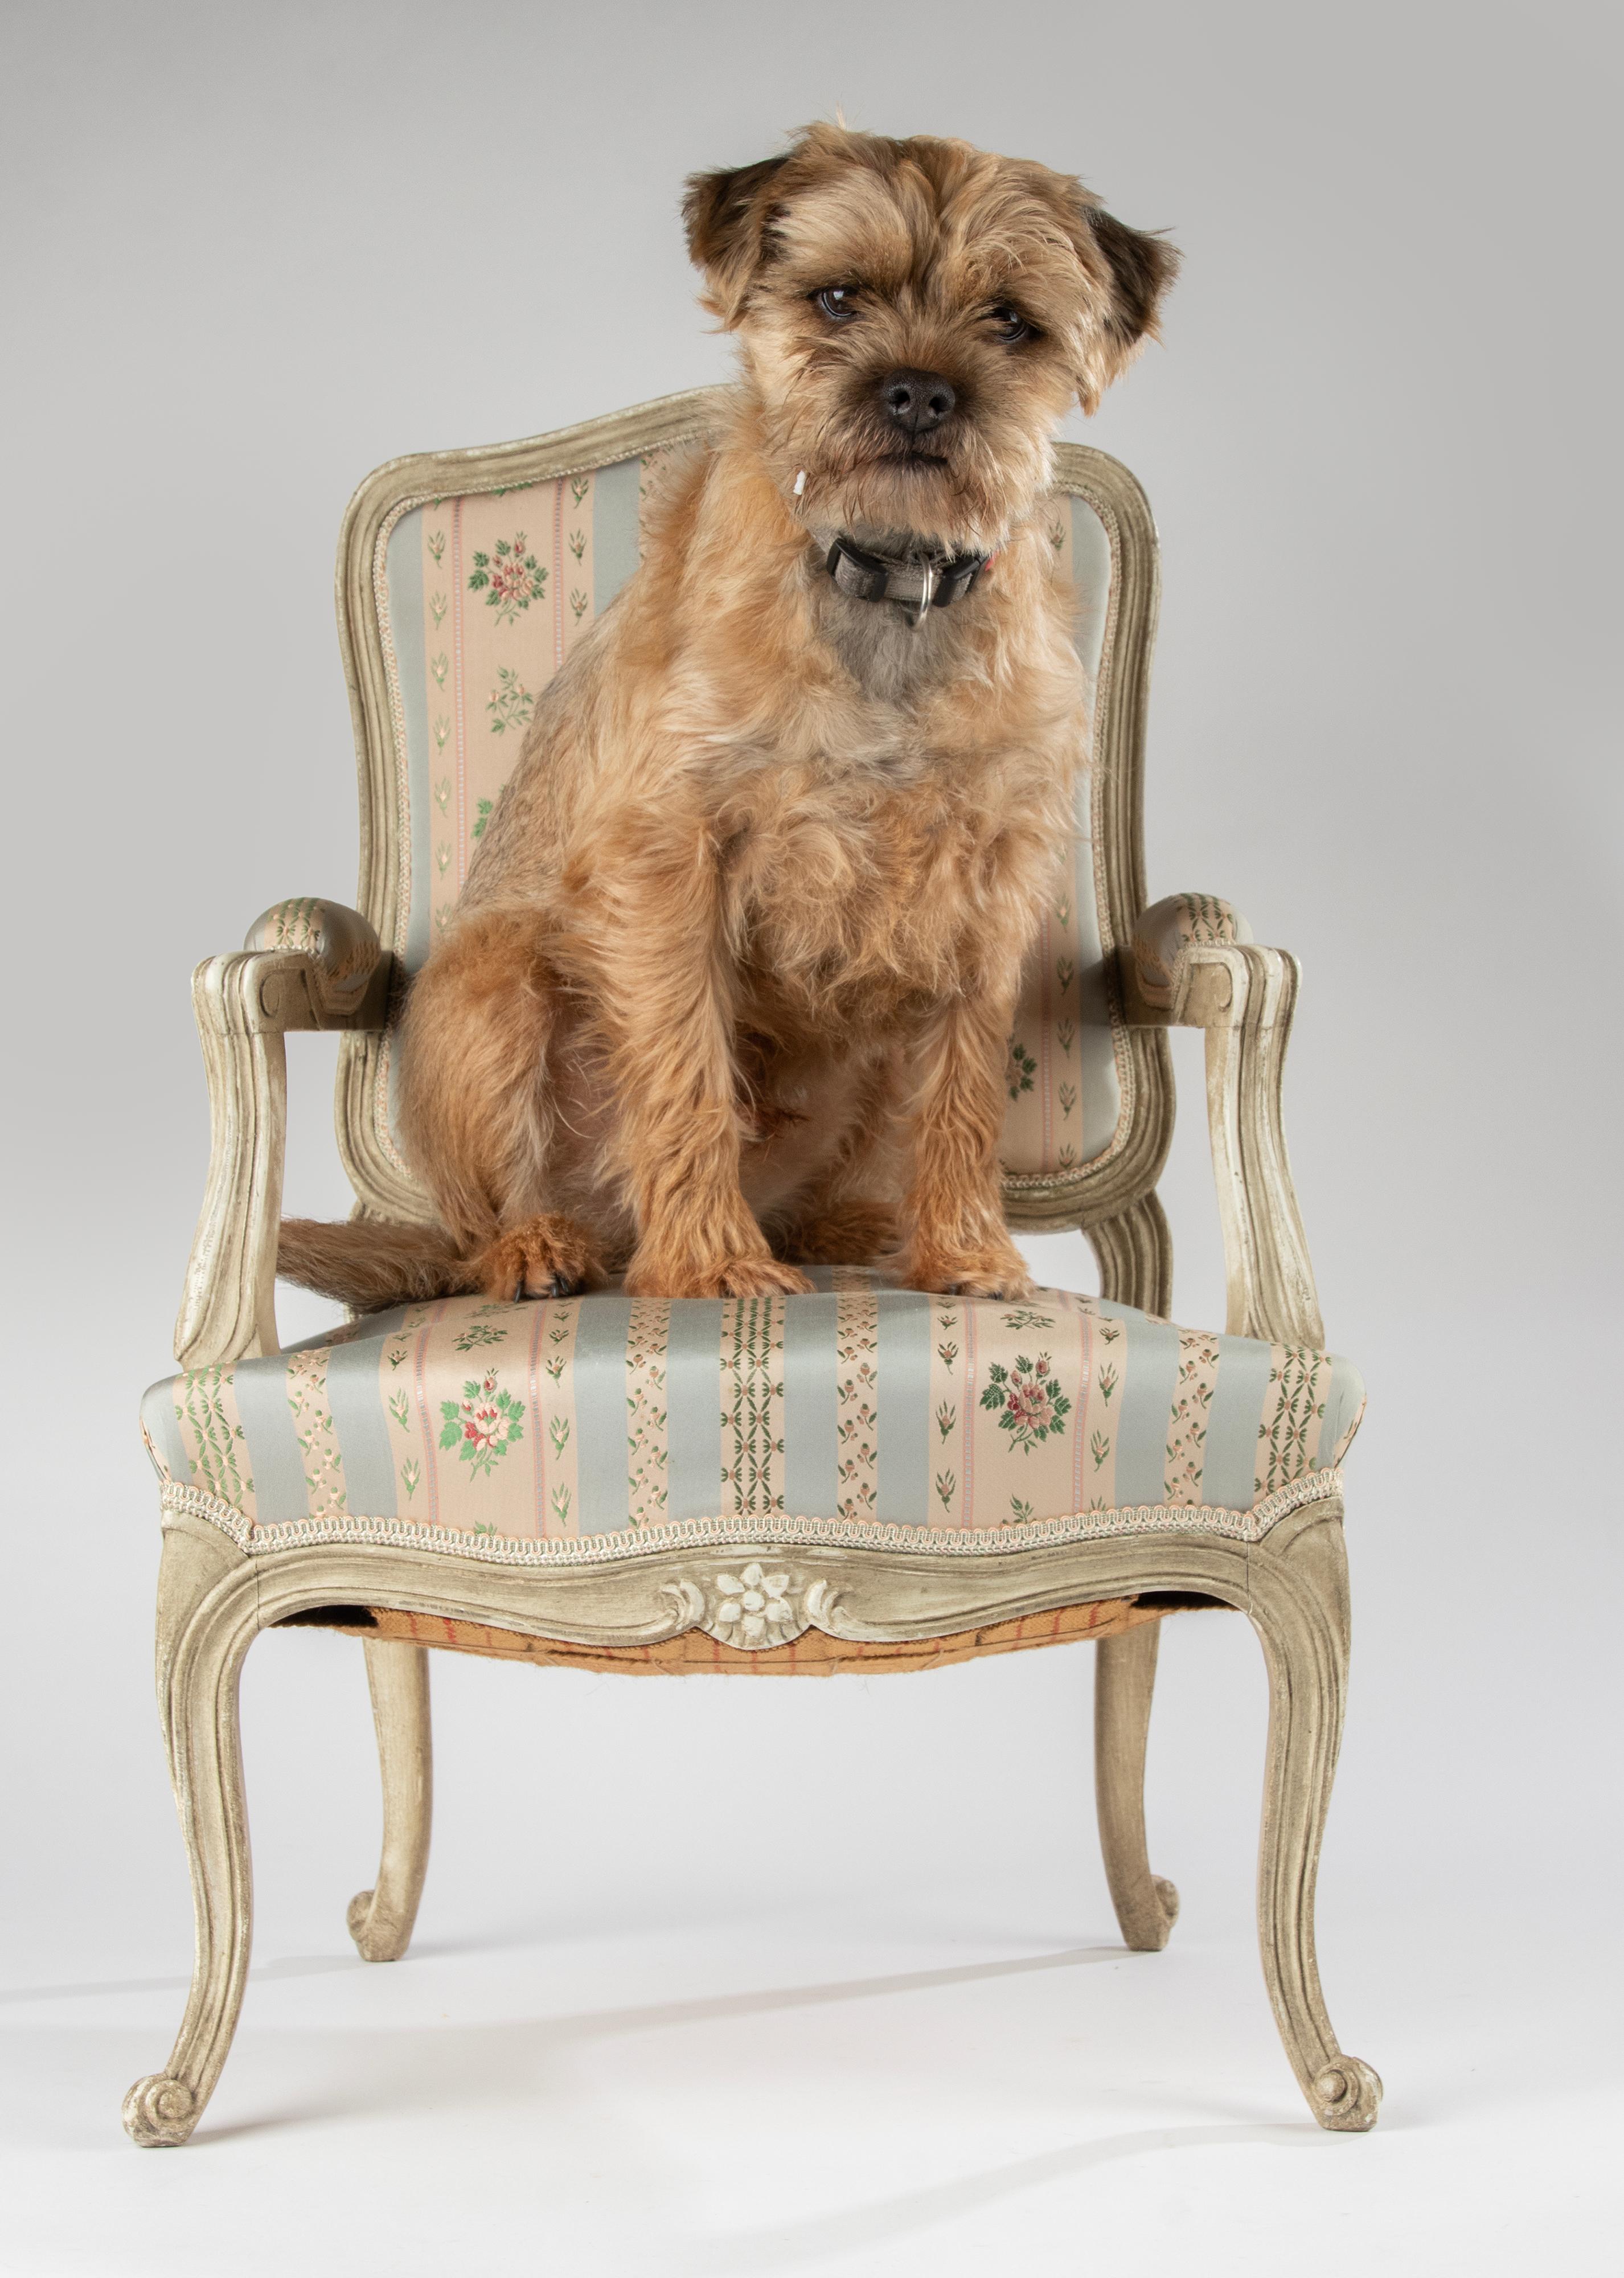 A lovely Louis XV style armchair, specially made for kids (or your small dog). This curvilinear model armchair is also called 